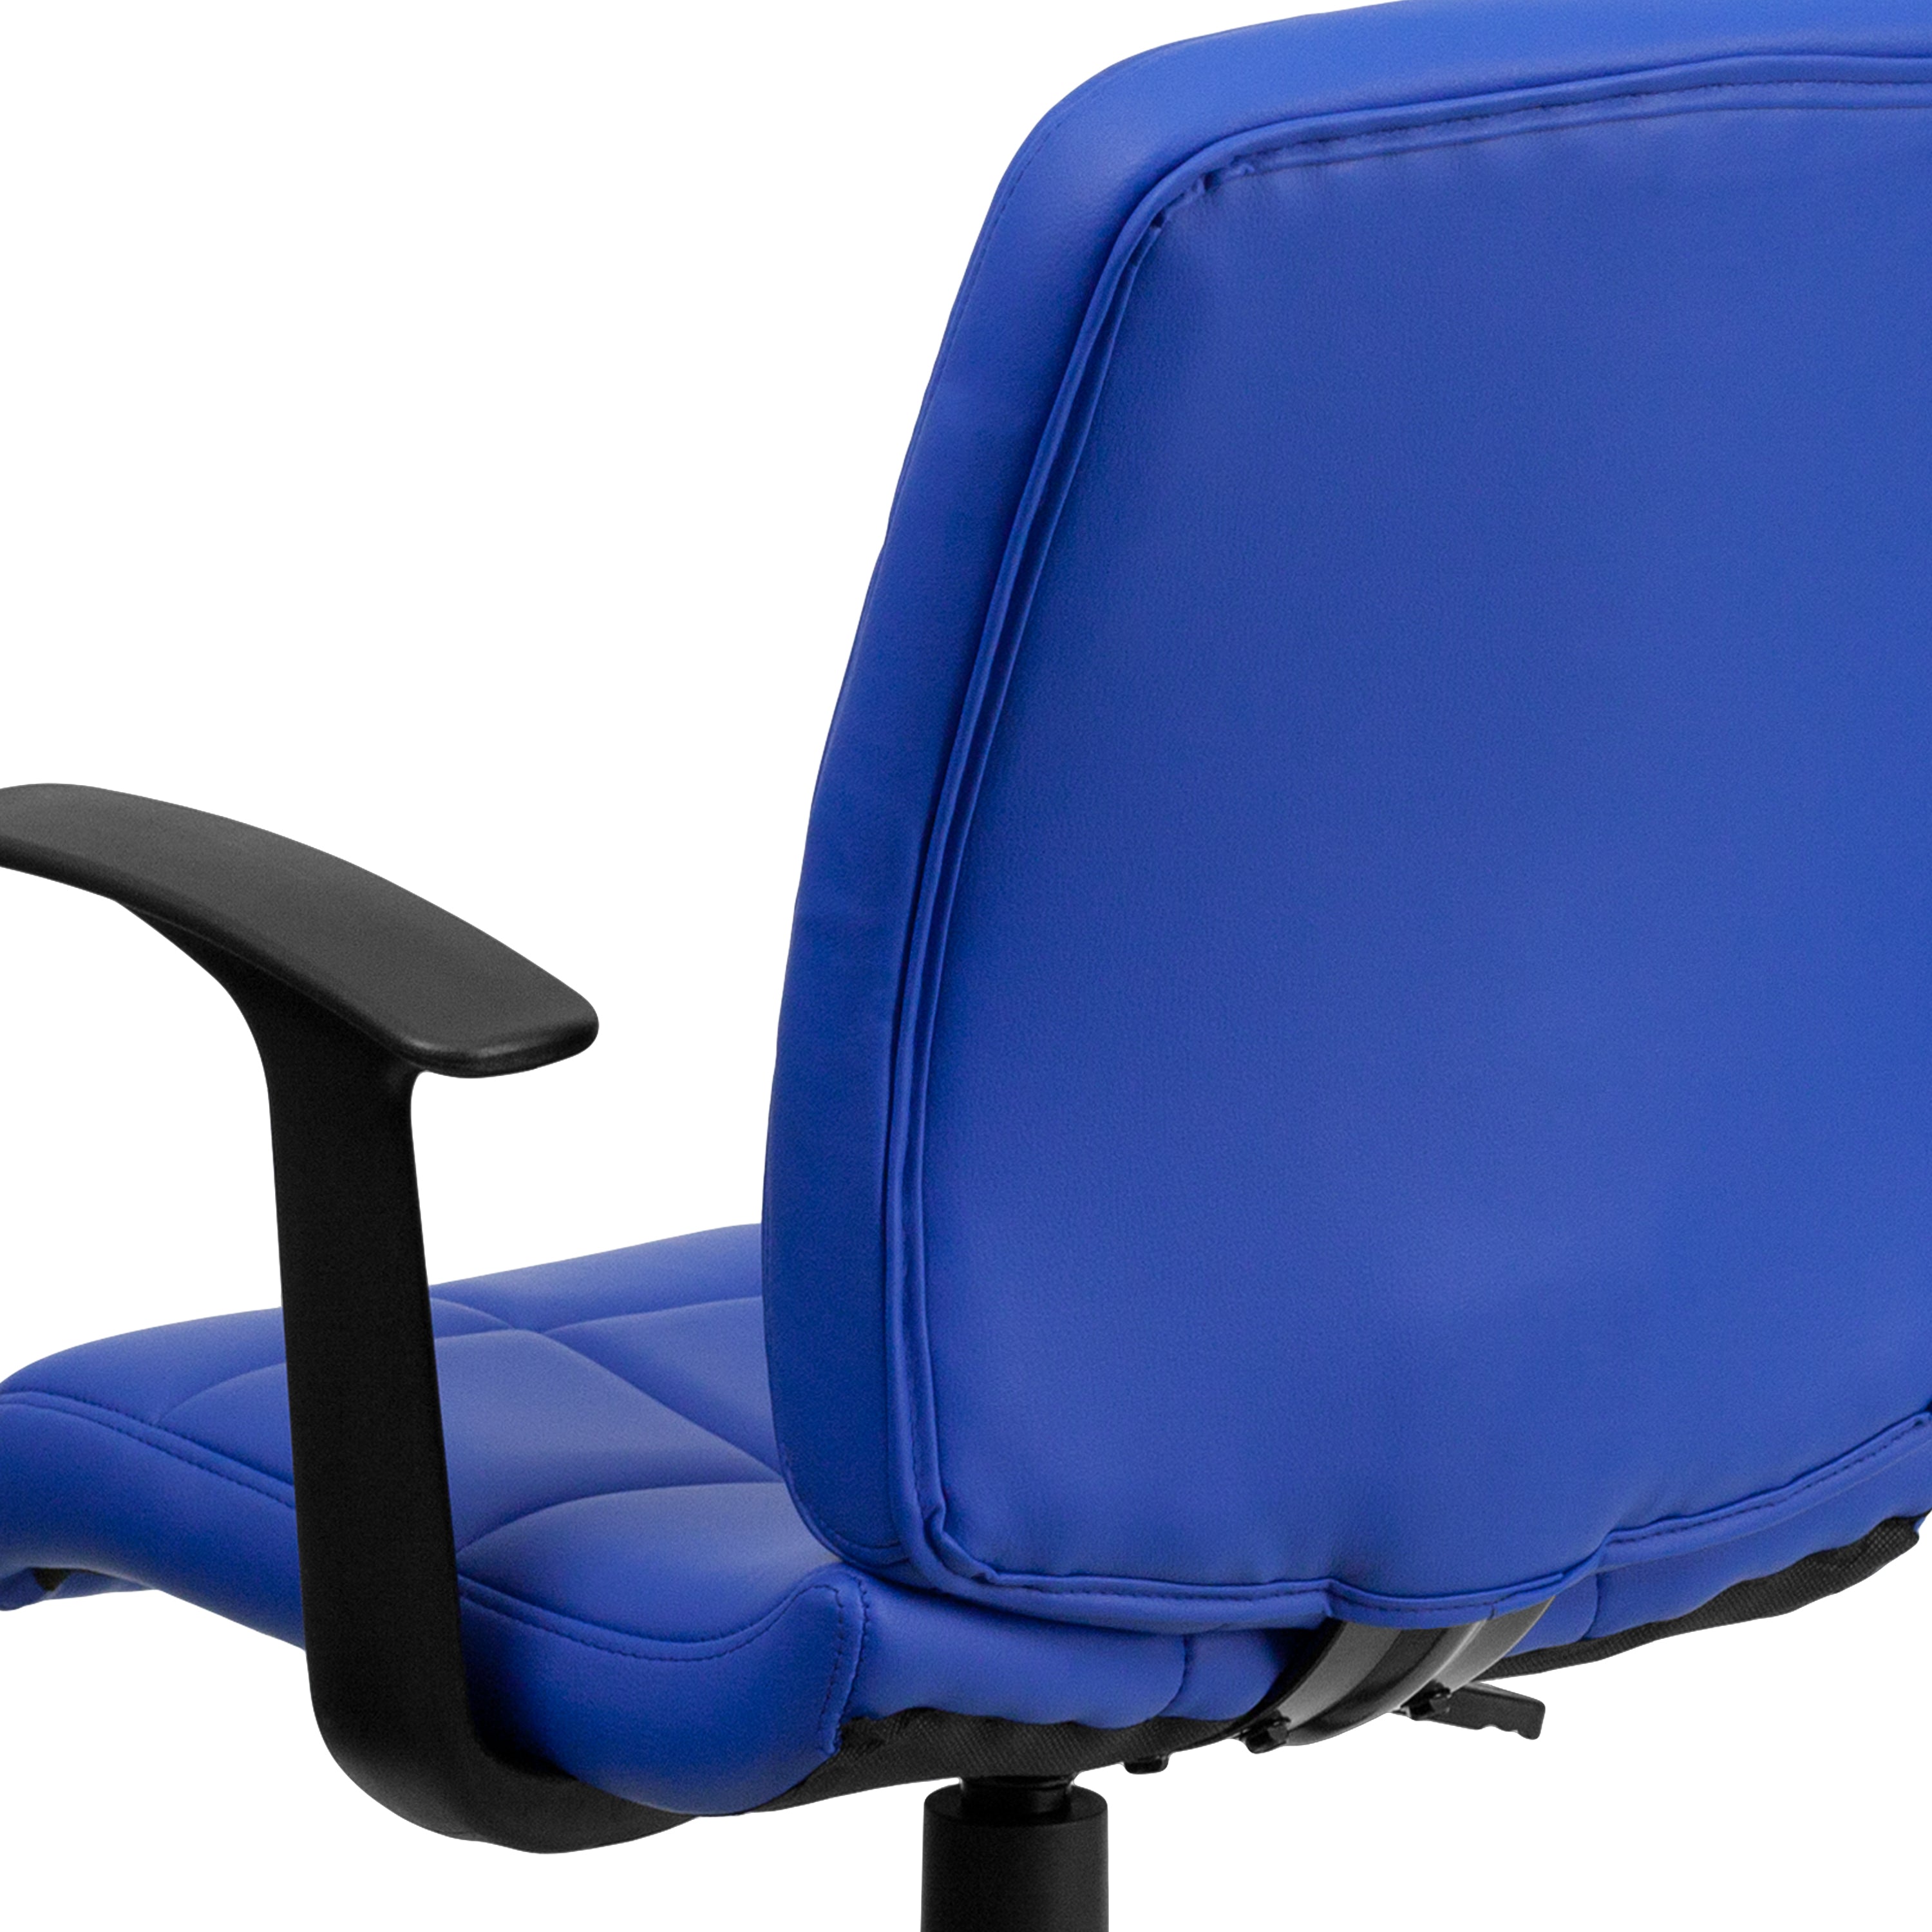 Mid-Back Quilted Vinyl Swivel Task Office Chair with Arms-Office Chair-Flash Furniture-Wall2Wall Furnishings